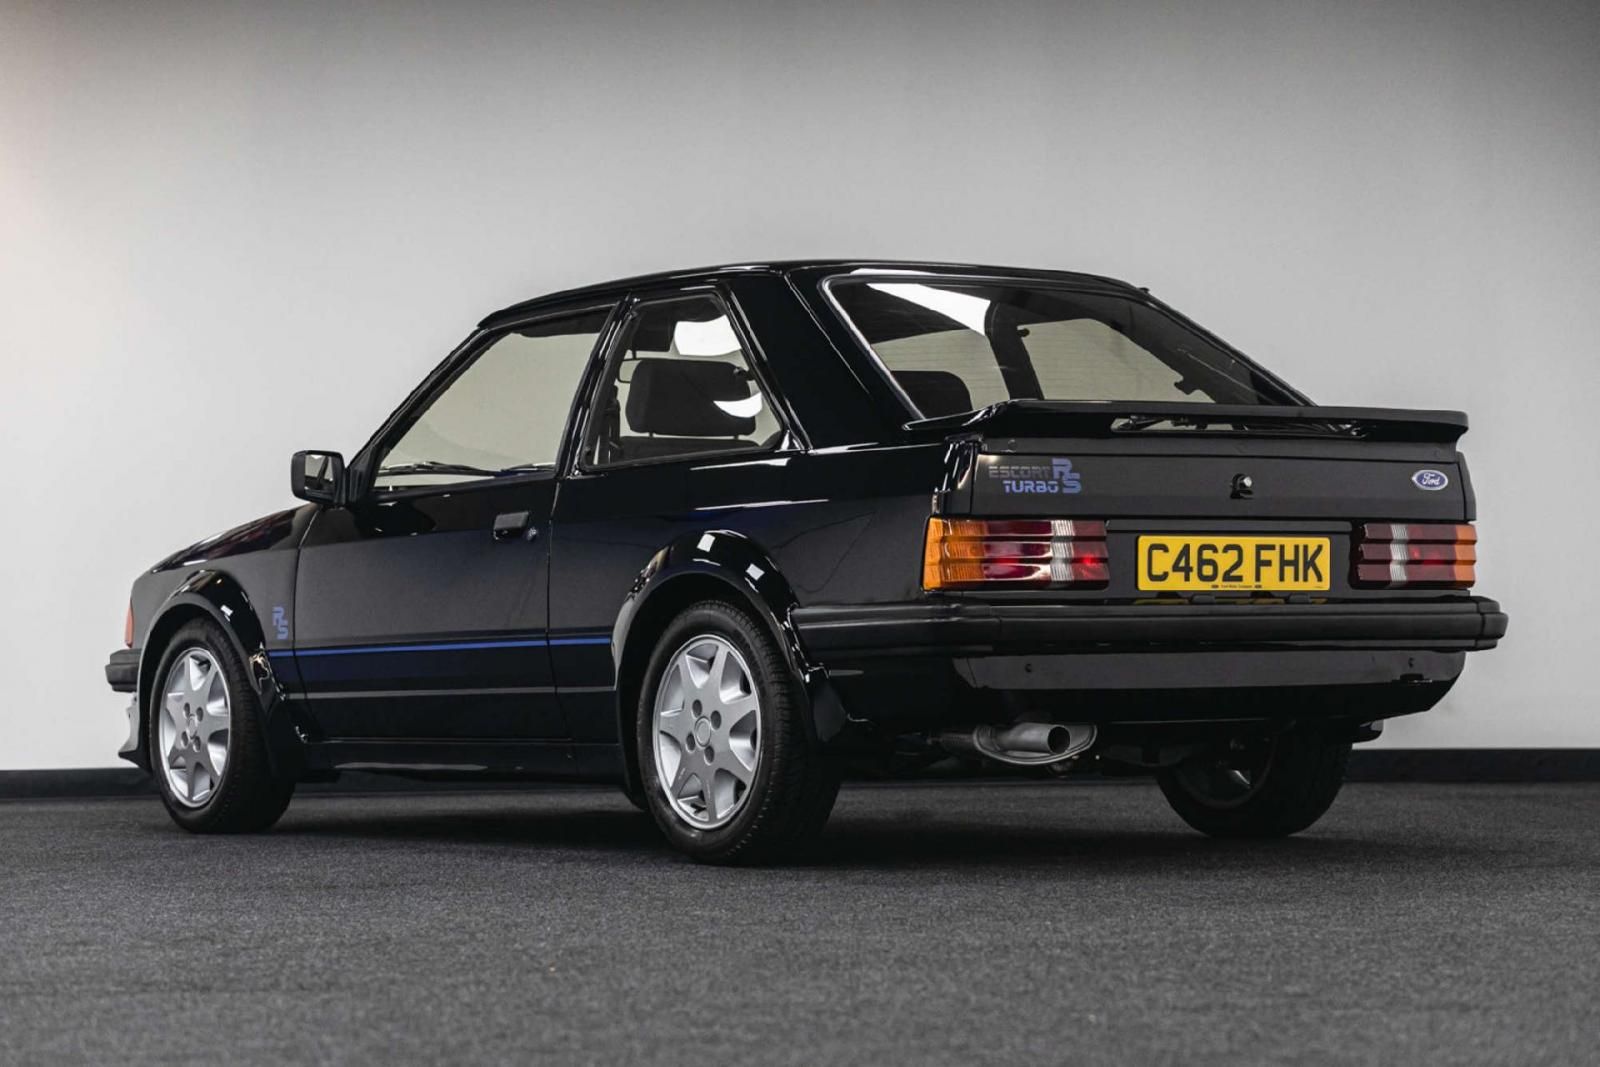 Lady Diana Princess of Wales 1985 Ford Escort RS Turbo